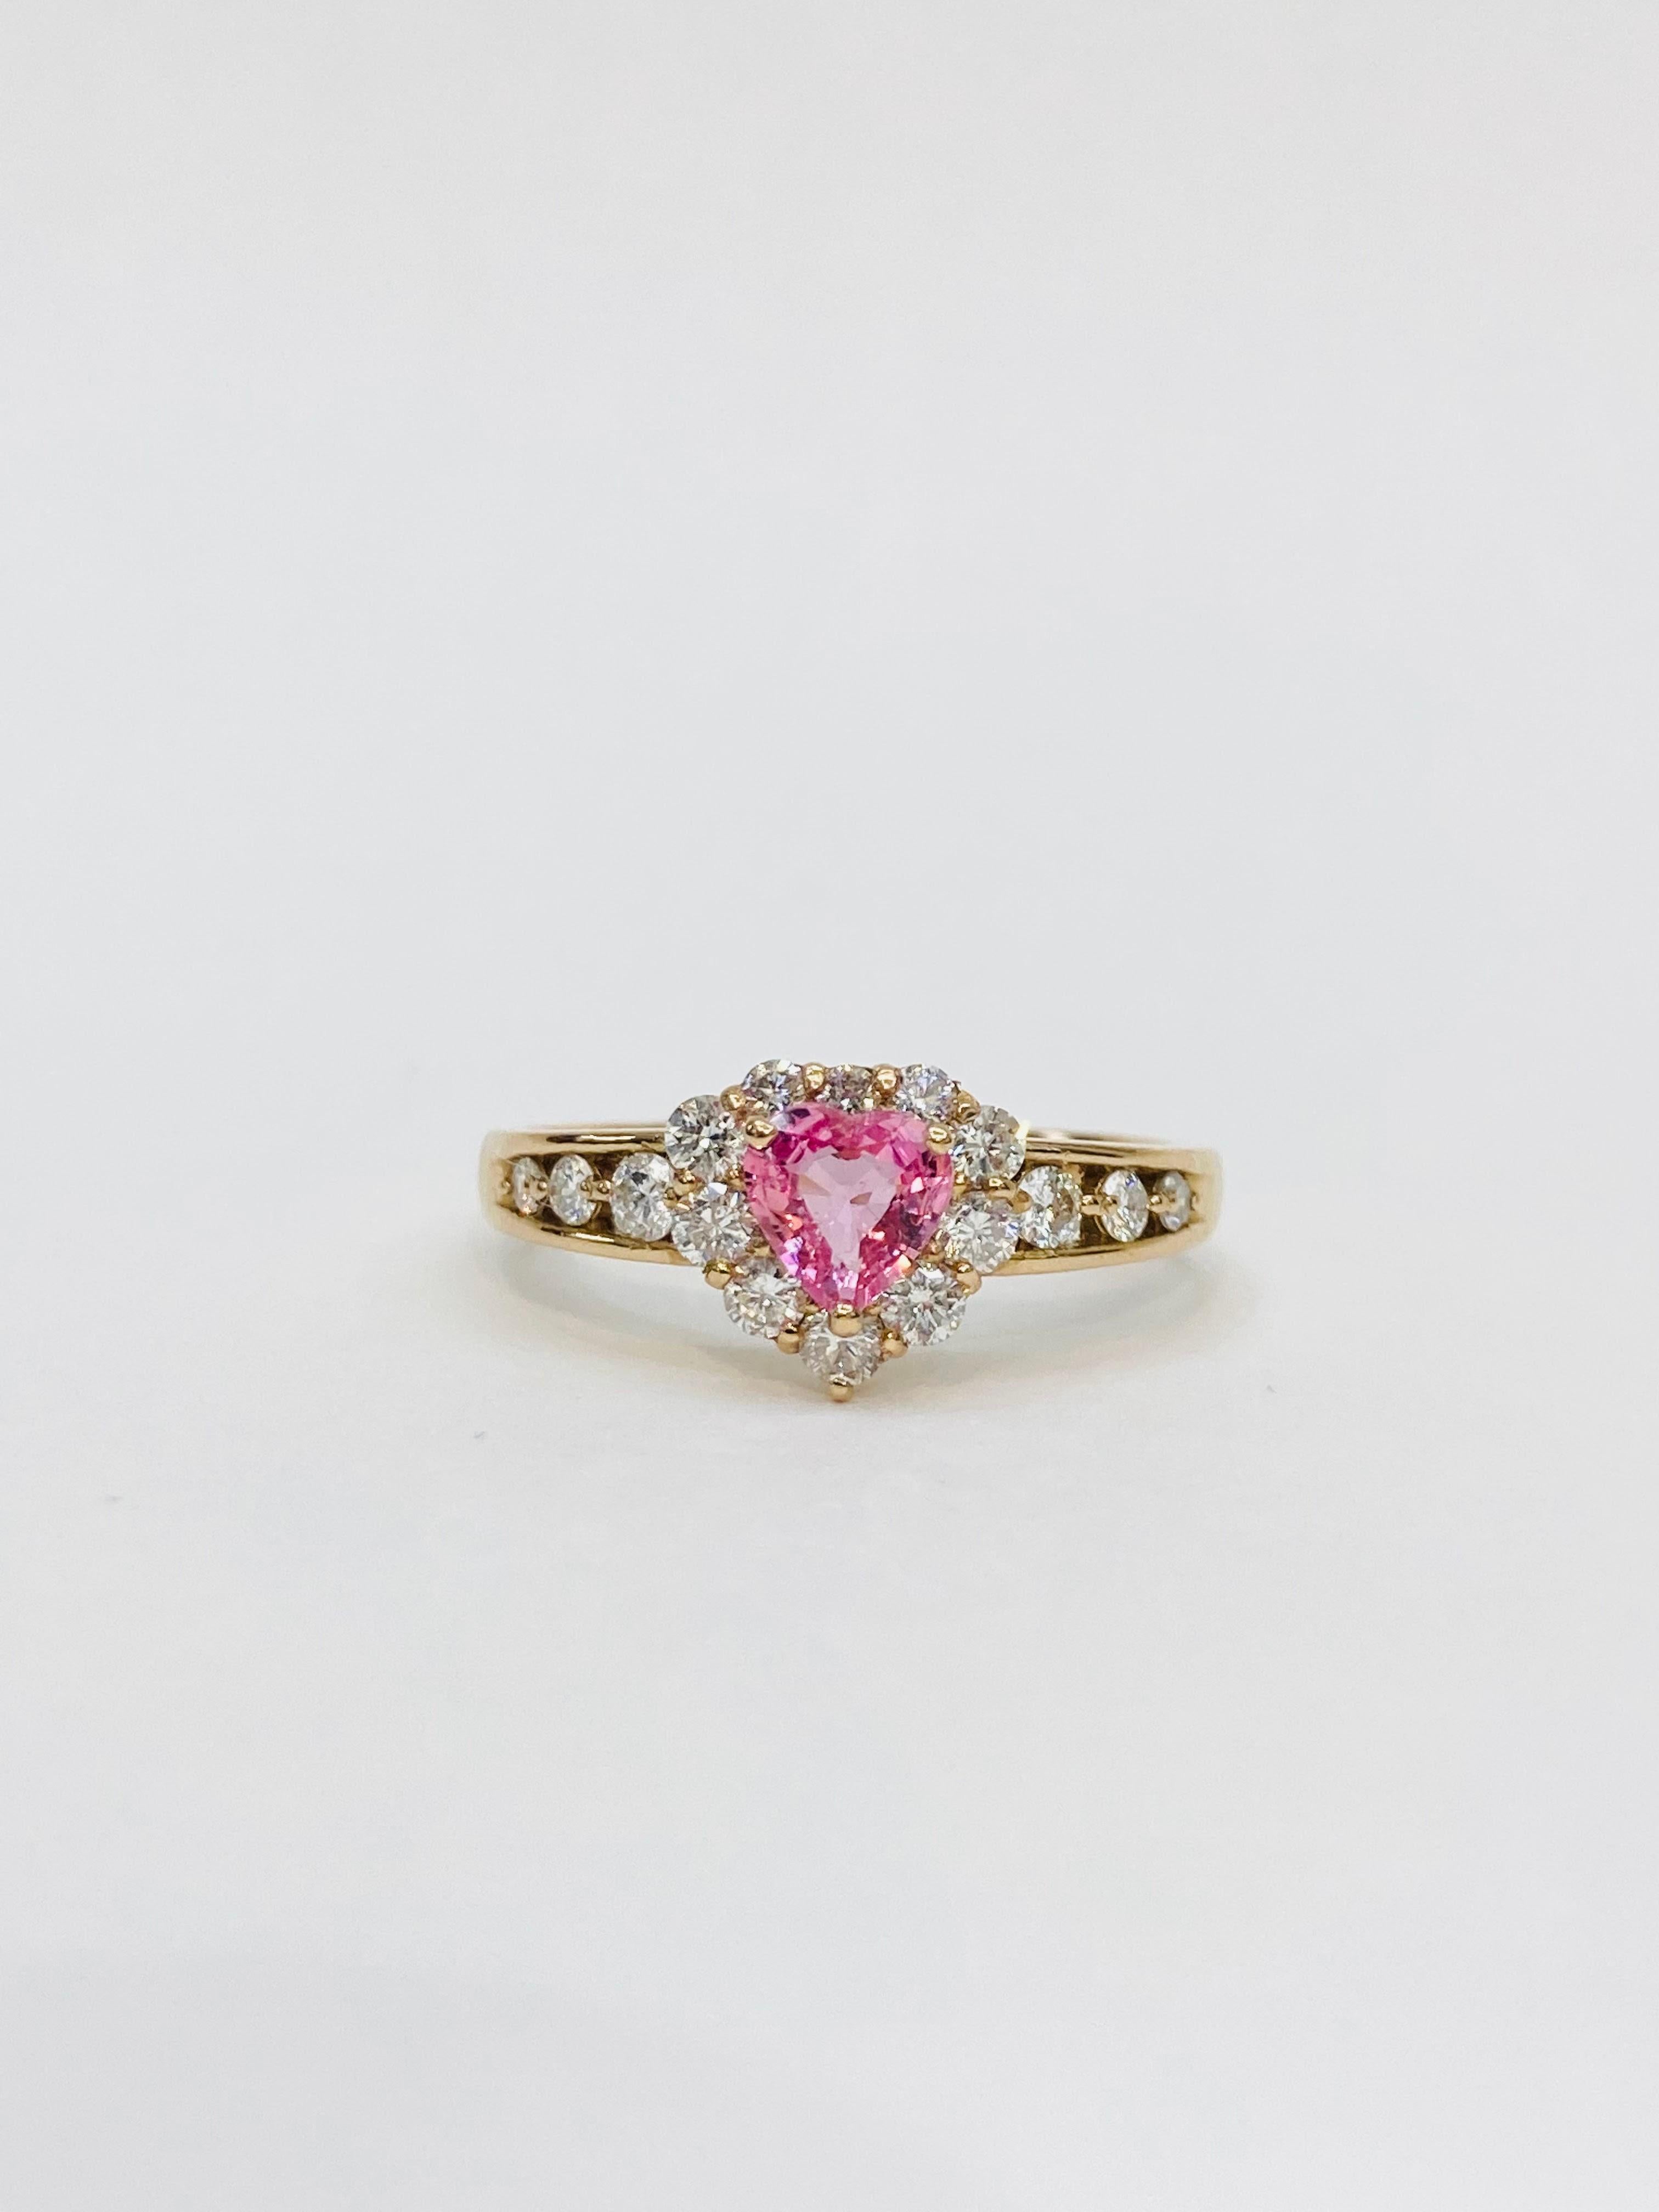 Bochic “Padparadscha” Pink Sapphire & Diamond Cluster 18K Gold Ring  For Sale 7